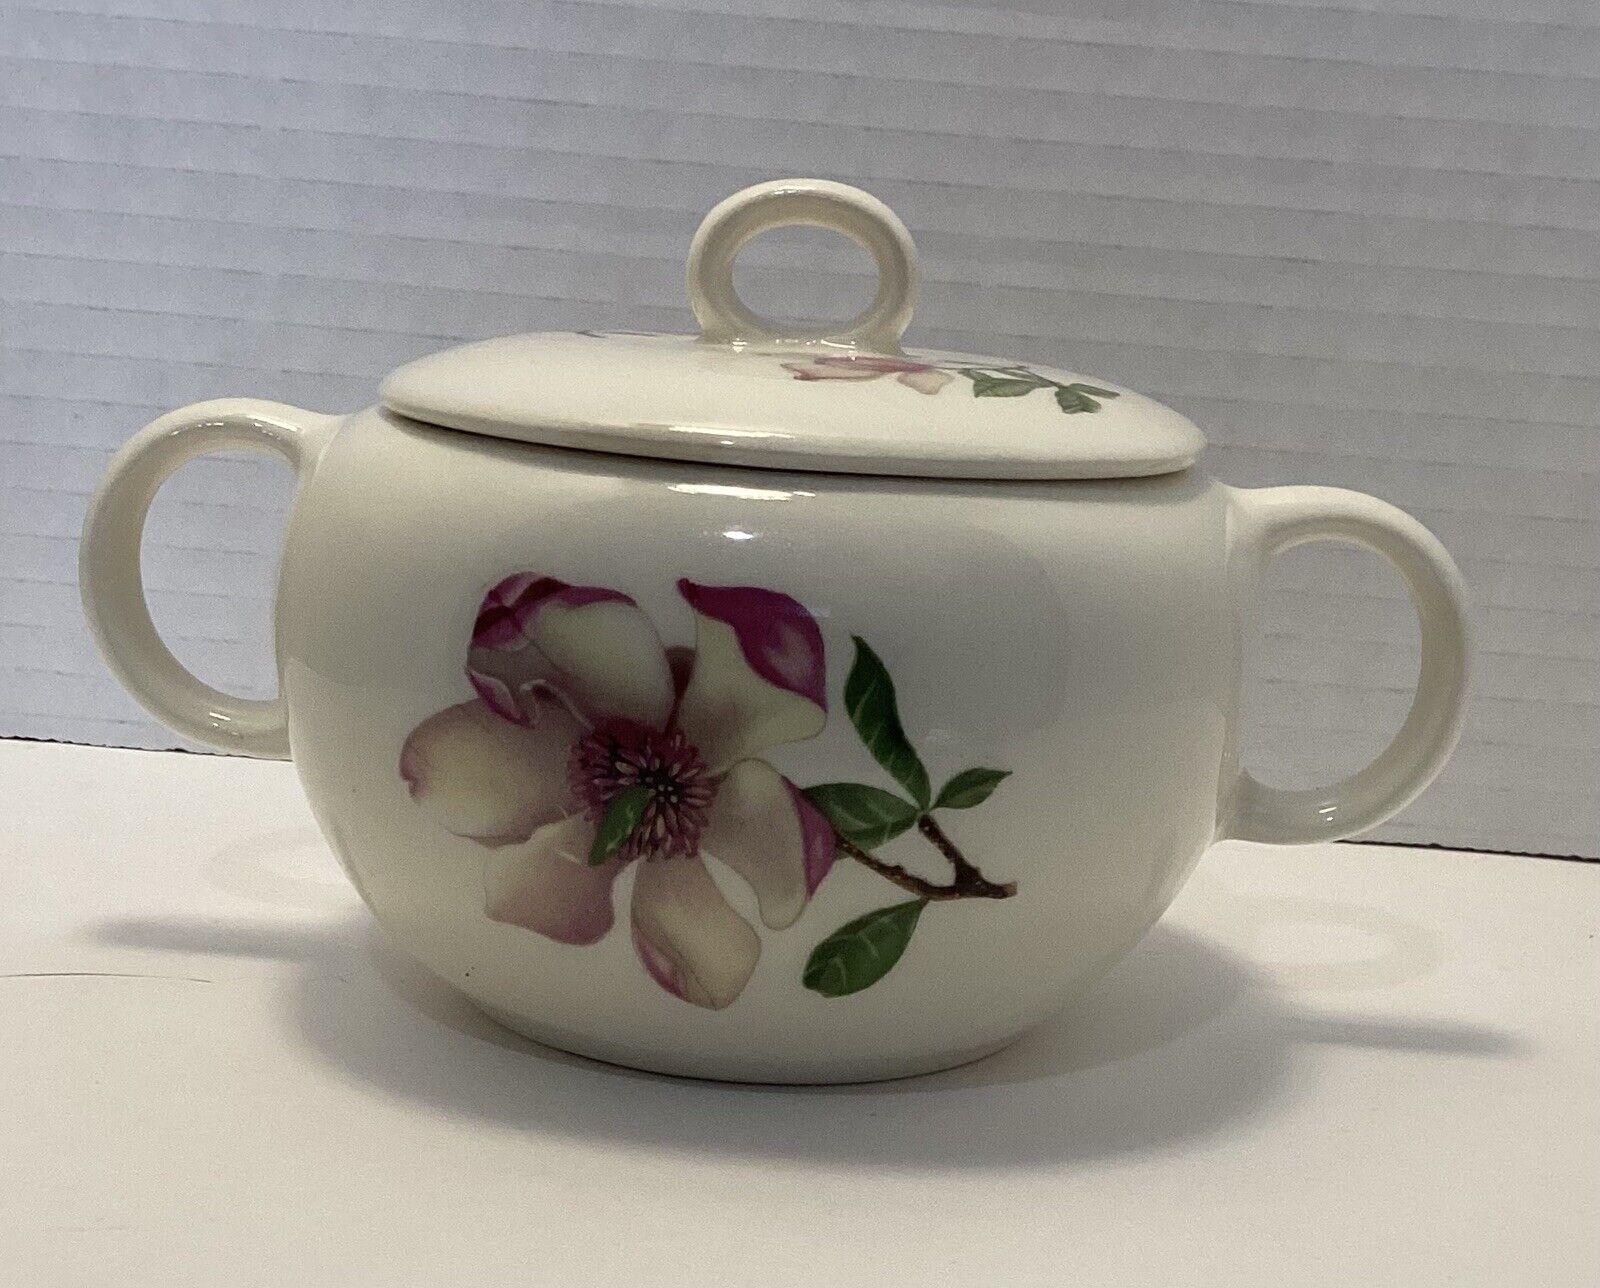 Crooksville Sugar Bowl With Lid White With Magnolia Flower Delmar Diana